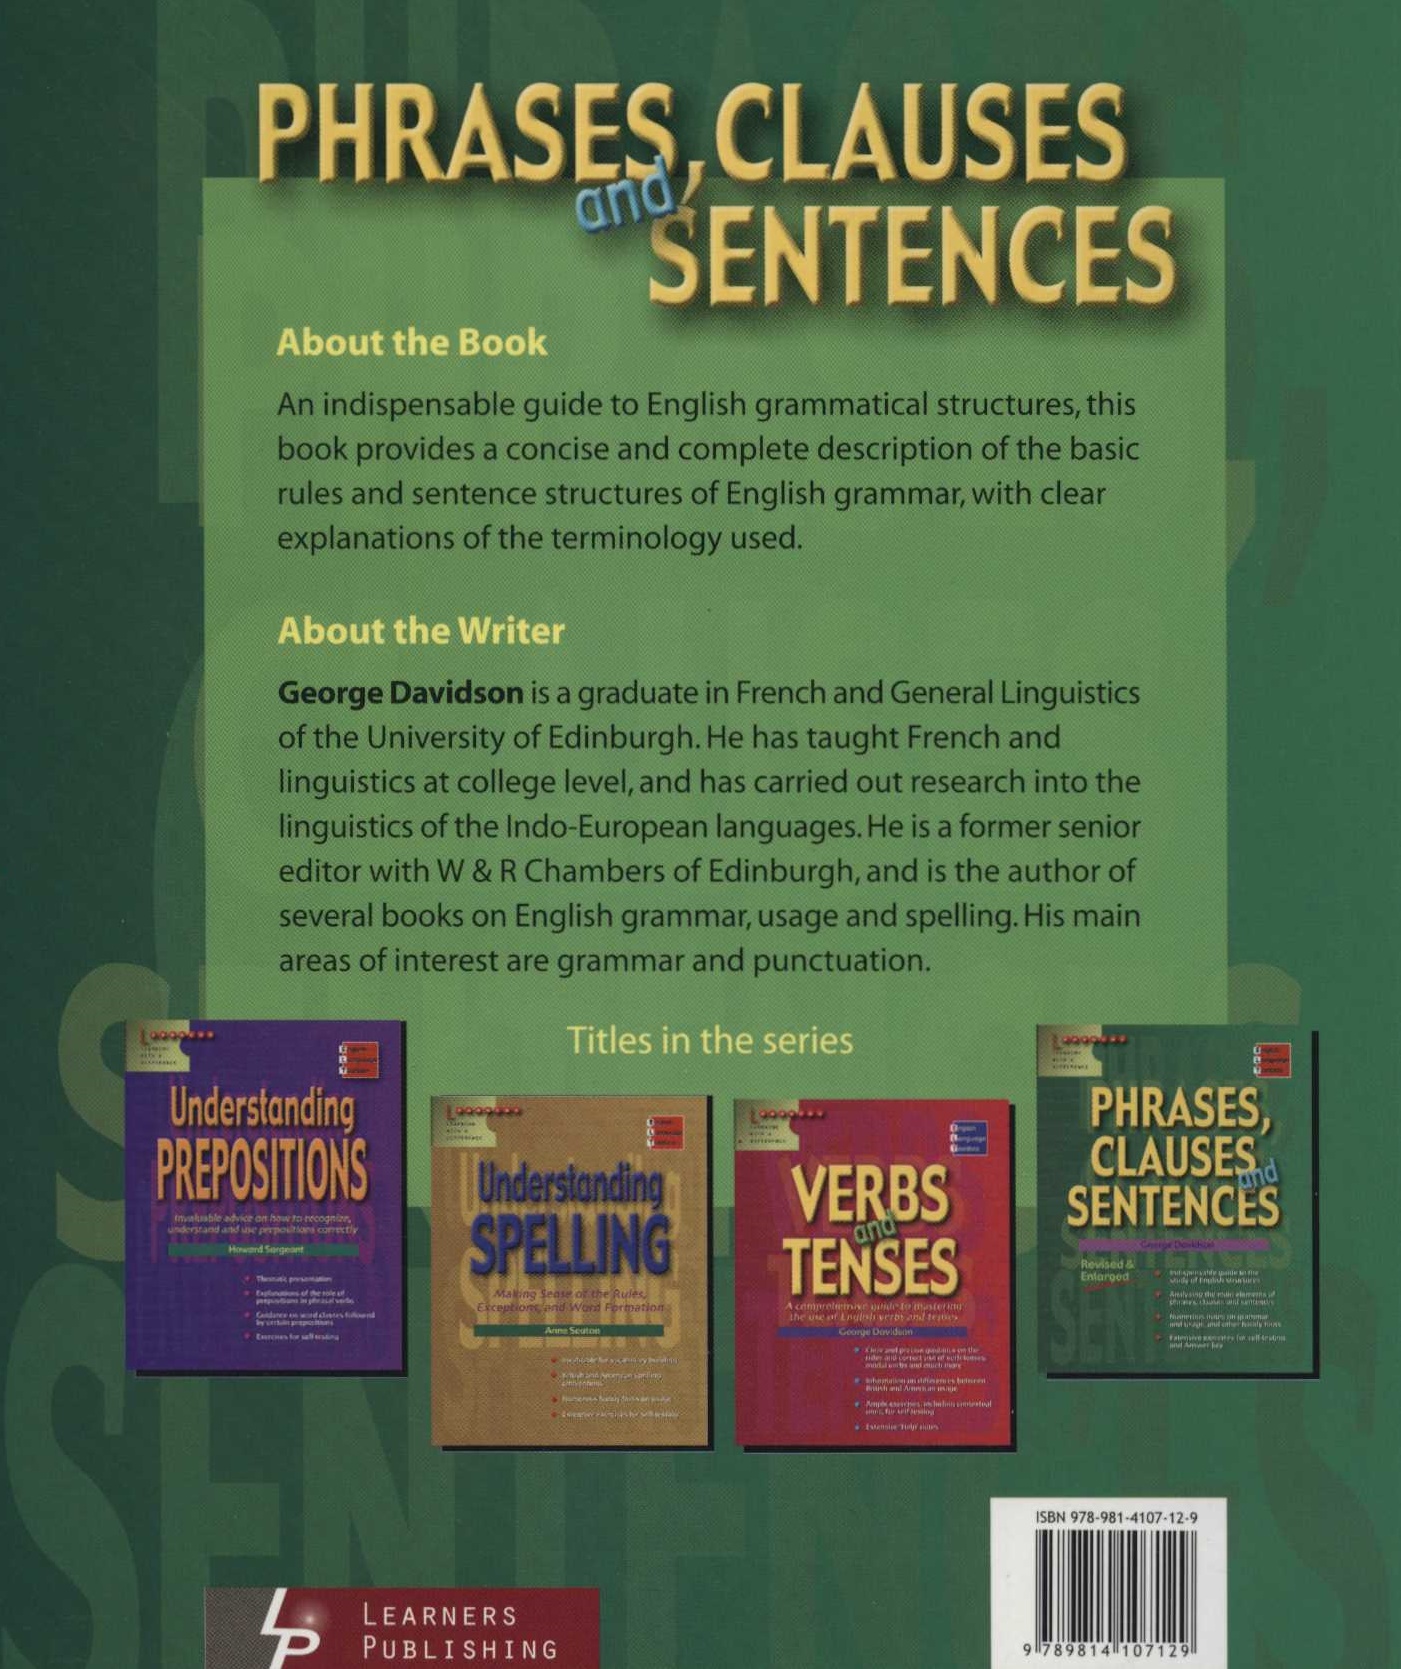 phrases-clauses-and-sentences-2-educational-worksheets-books-australian-curriculum